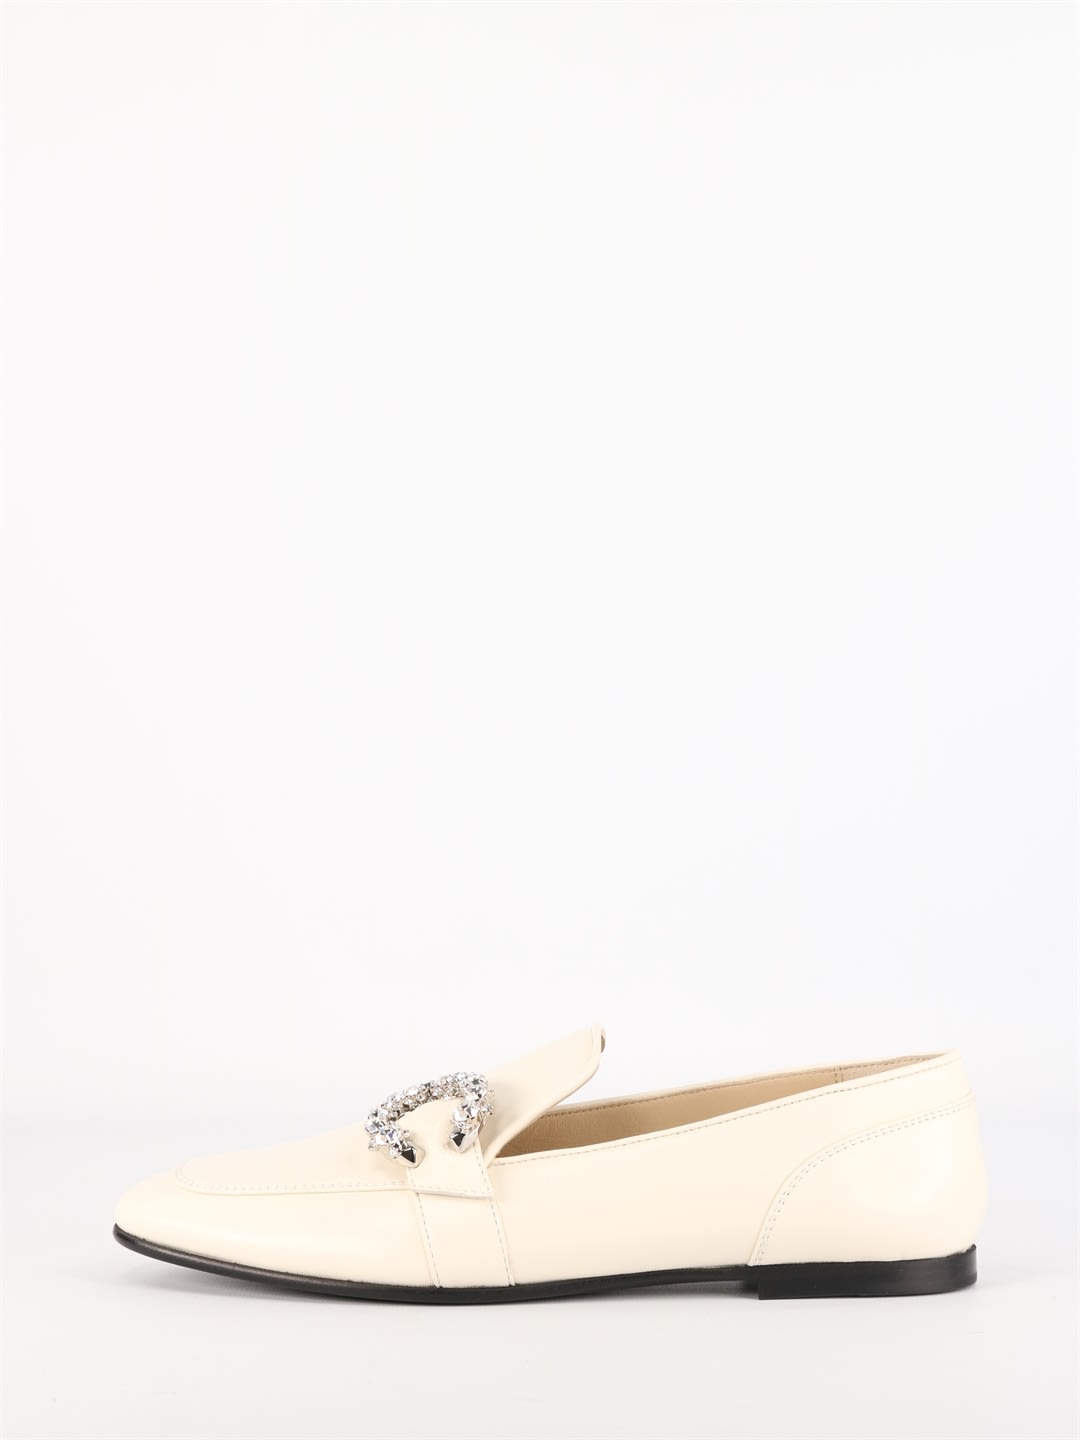 Buy Jimmy Choo White Jewel Mocassin online, shop Jimmy Choo shoes with free shipping